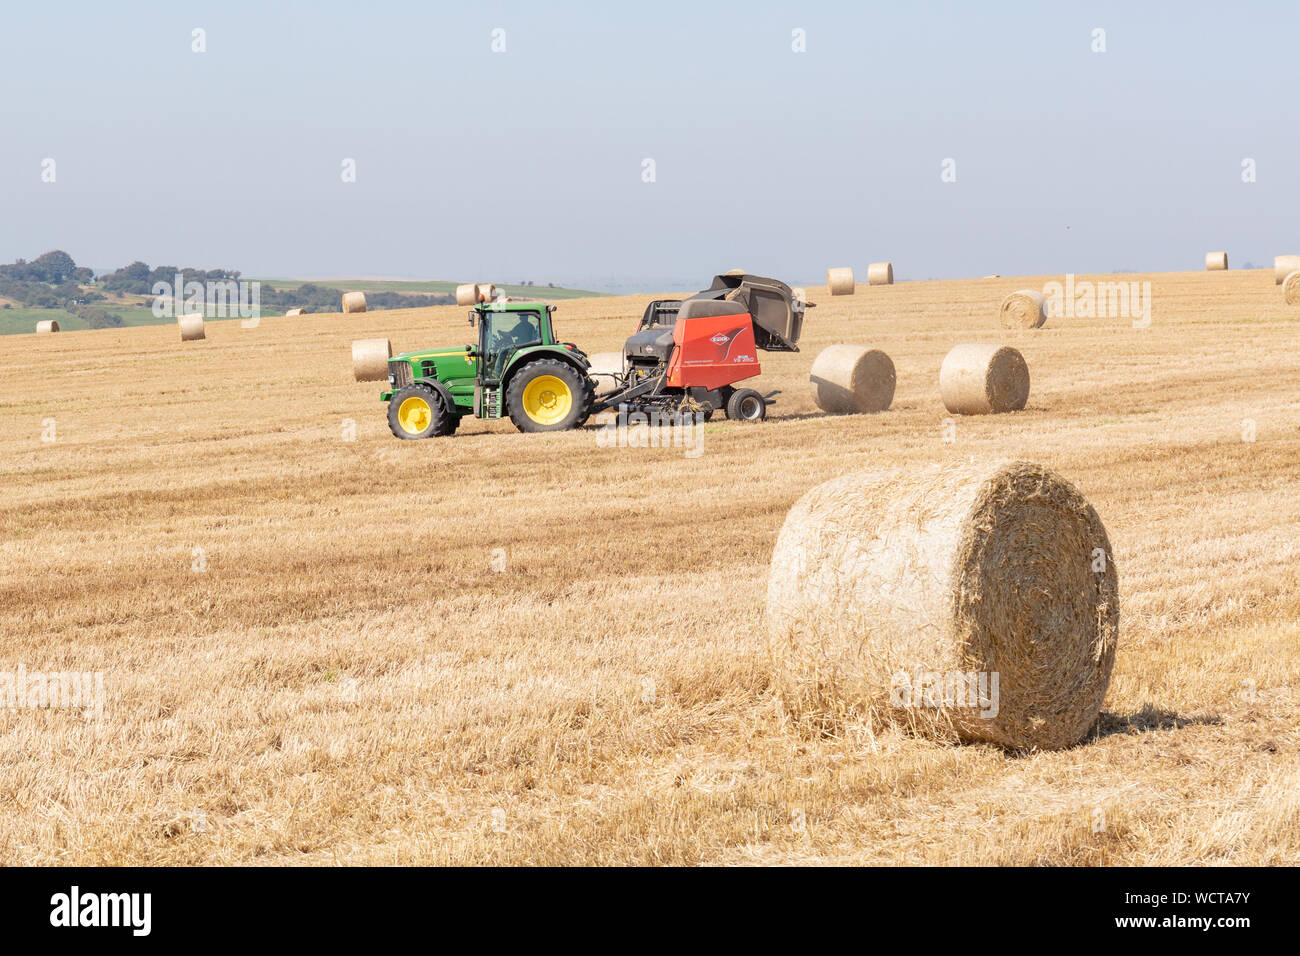 Near Devils Dyke, Brighton, UK; 26th August 2019; Farmer in a Tractor Using Hay Bales on a Bright Hazy Day Stock Photo